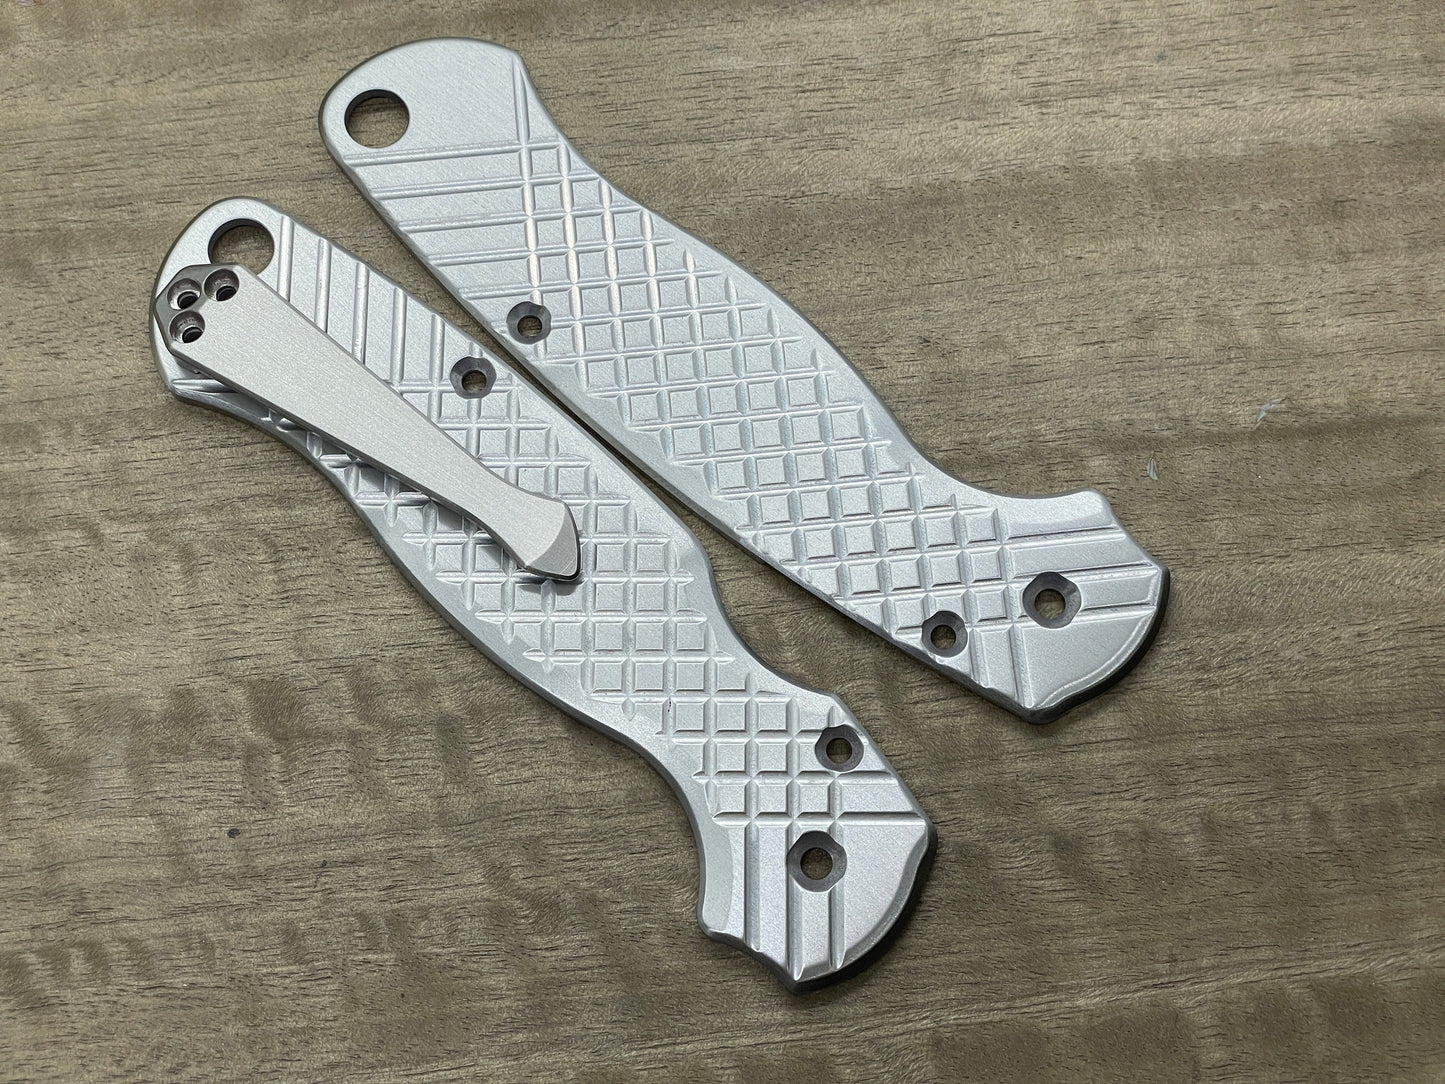 Redesigned FRAG milled Titanium scales for Spyderco Para 3